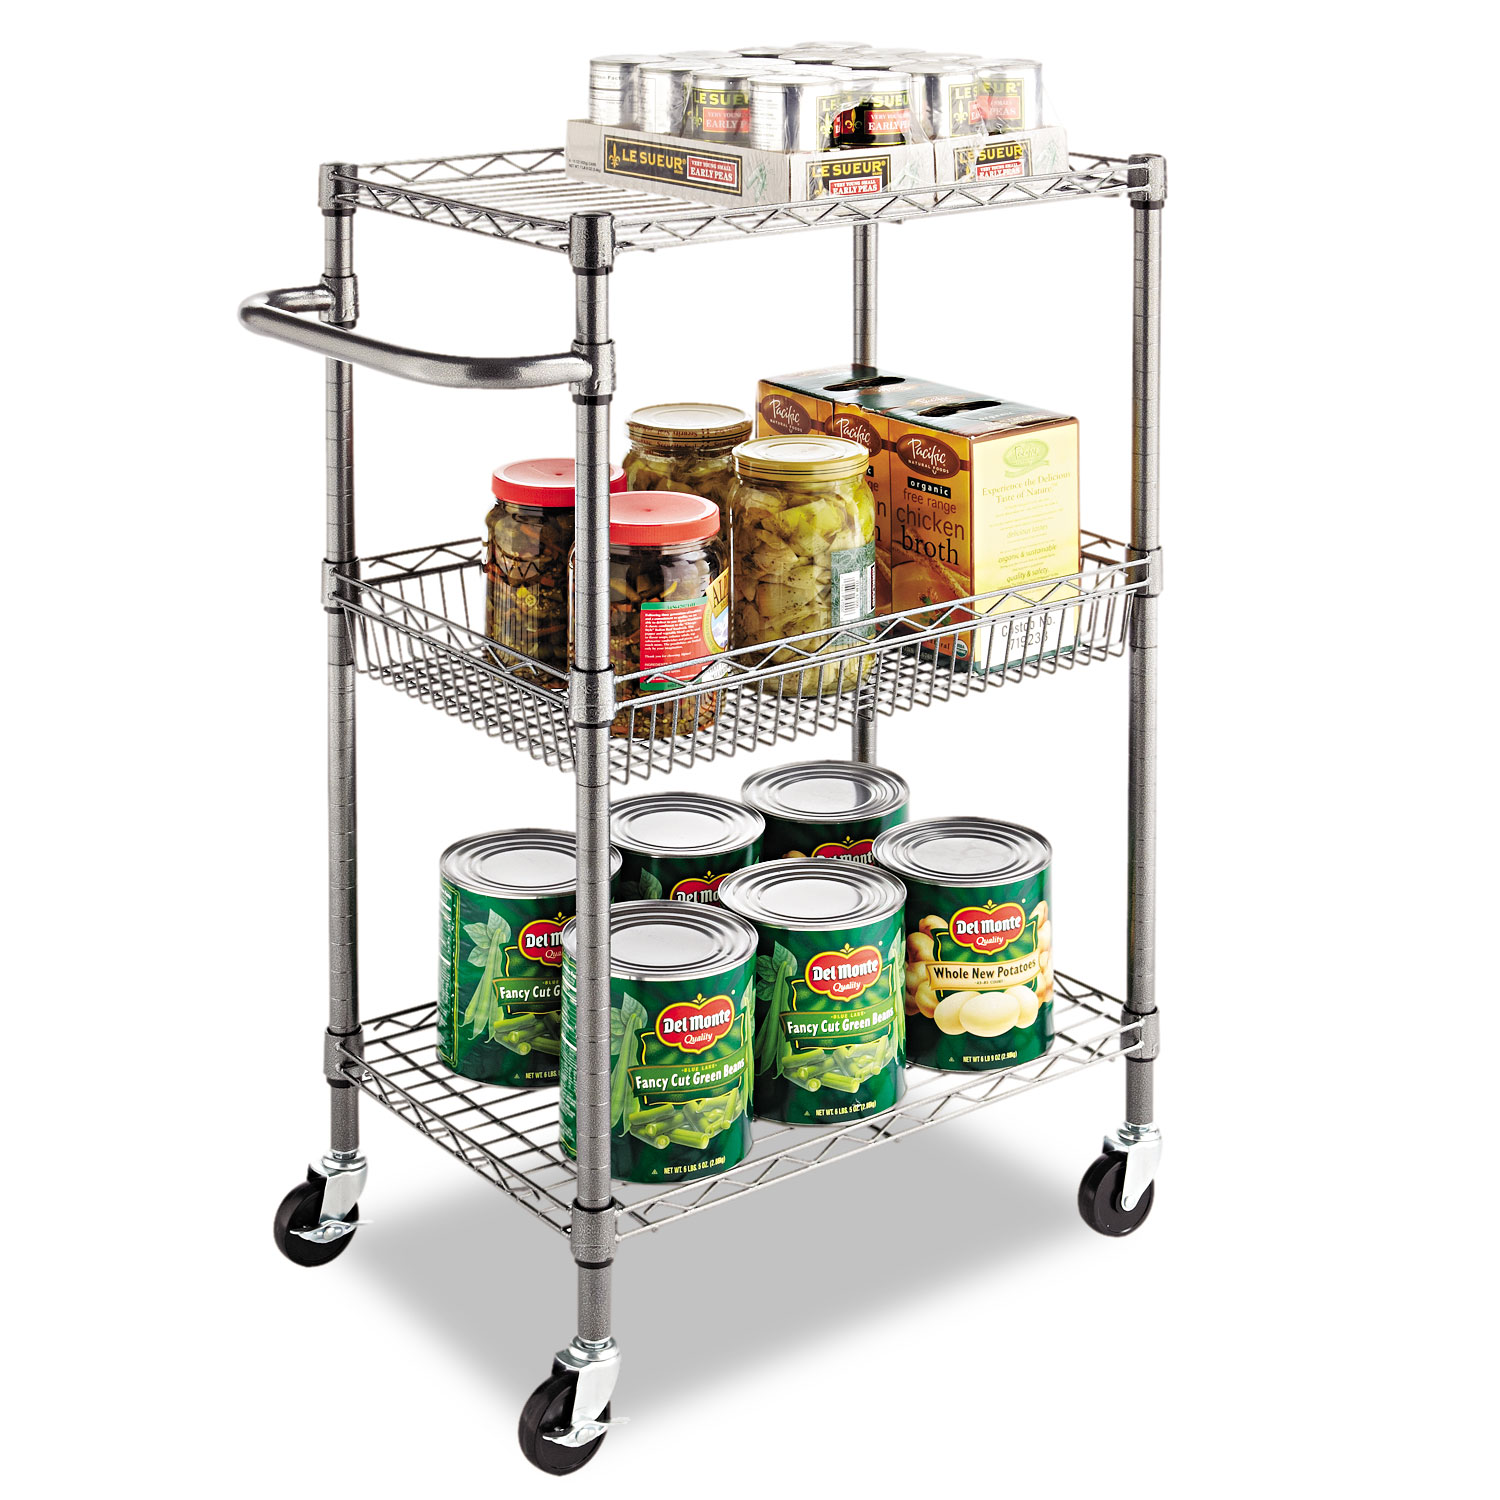 Three-Tier Wire Cart with Basket, Metal, 2 Shelves, 1 Bin, 500 lb Capacity,  28 x 16 x 39, Black Anthracite